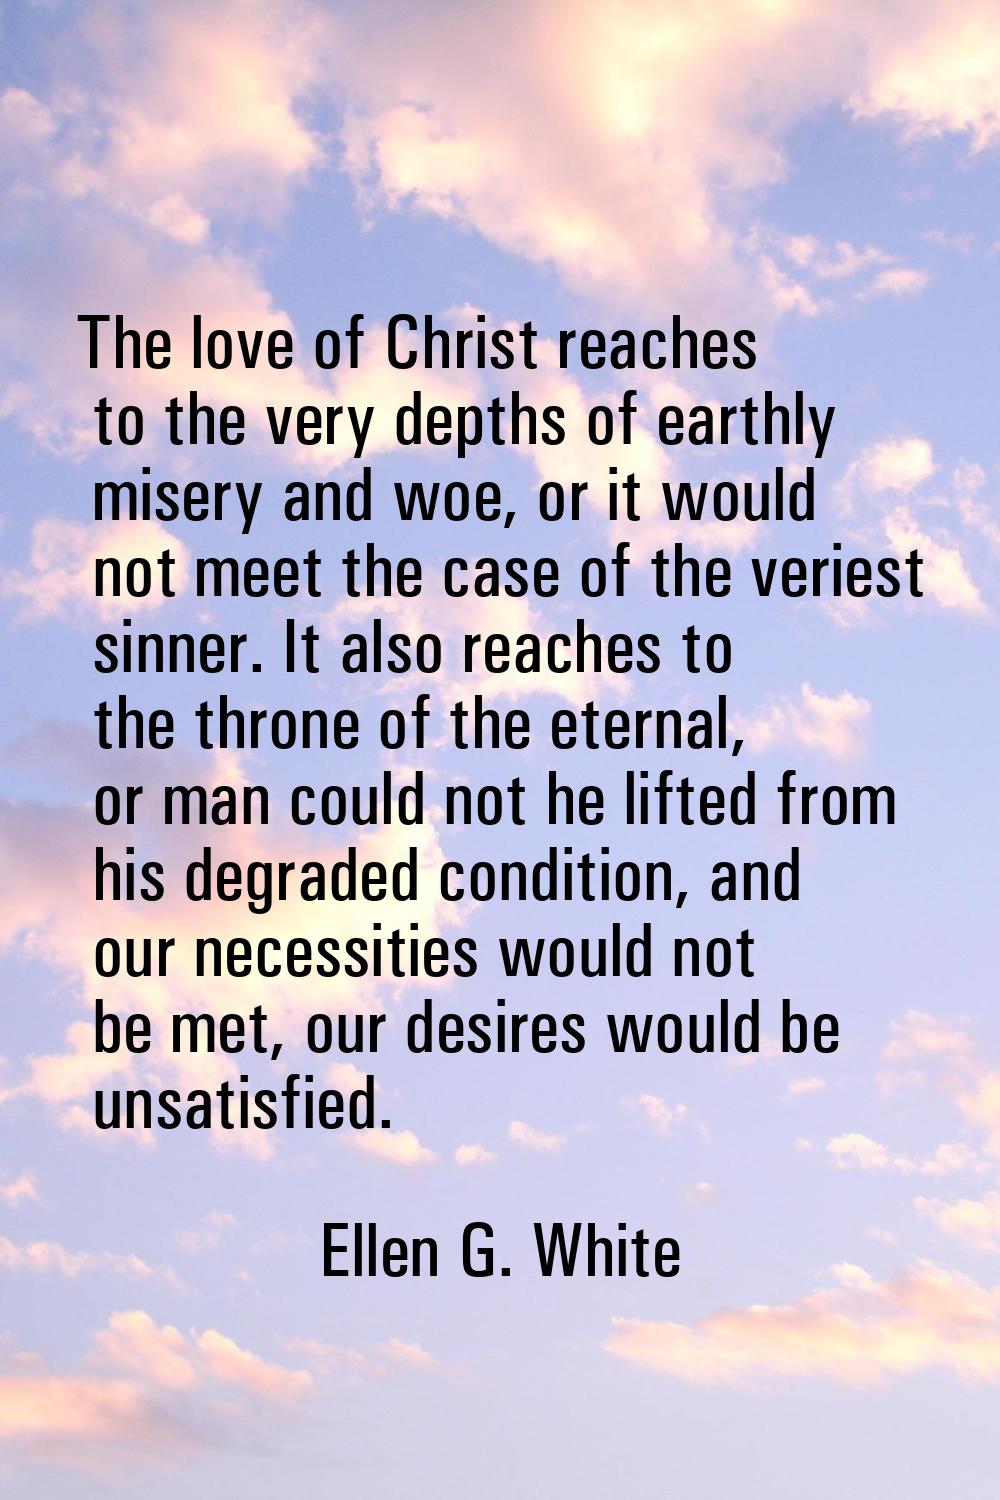 The love of Christ reaches to the very depths of earthly misery and woe, or it would not meet the c